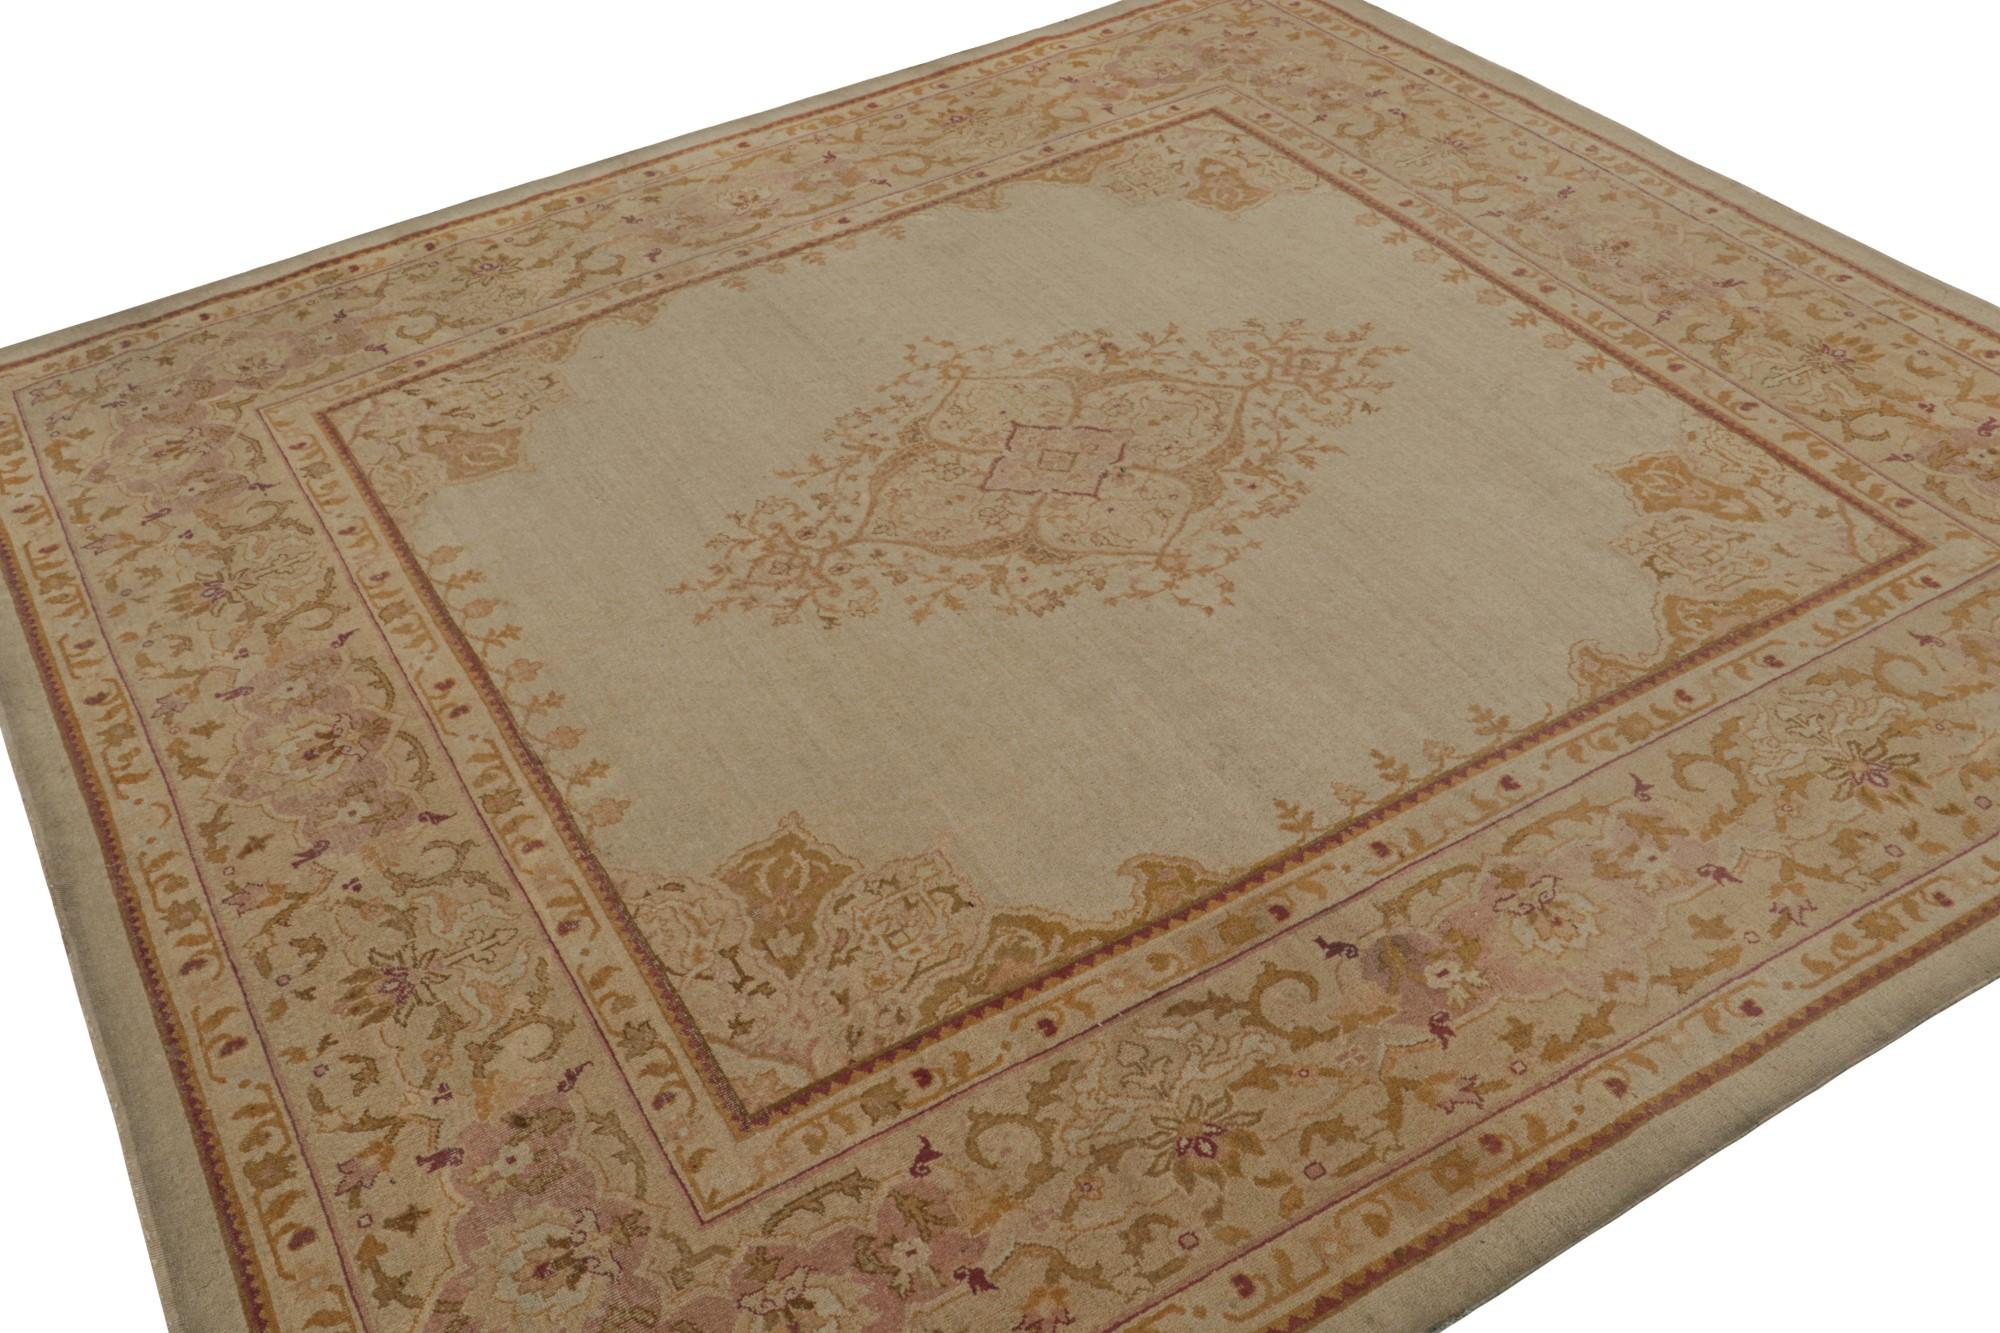 Hand-knotted in wool, this 8x8 antique Amritsar square rug is a unique open field piece in the masterpieces R&K Principal Jahanshah Nazmiyal curates for their distinction and beauty. 

On the Design: 

This antique Amritsar square rug is a